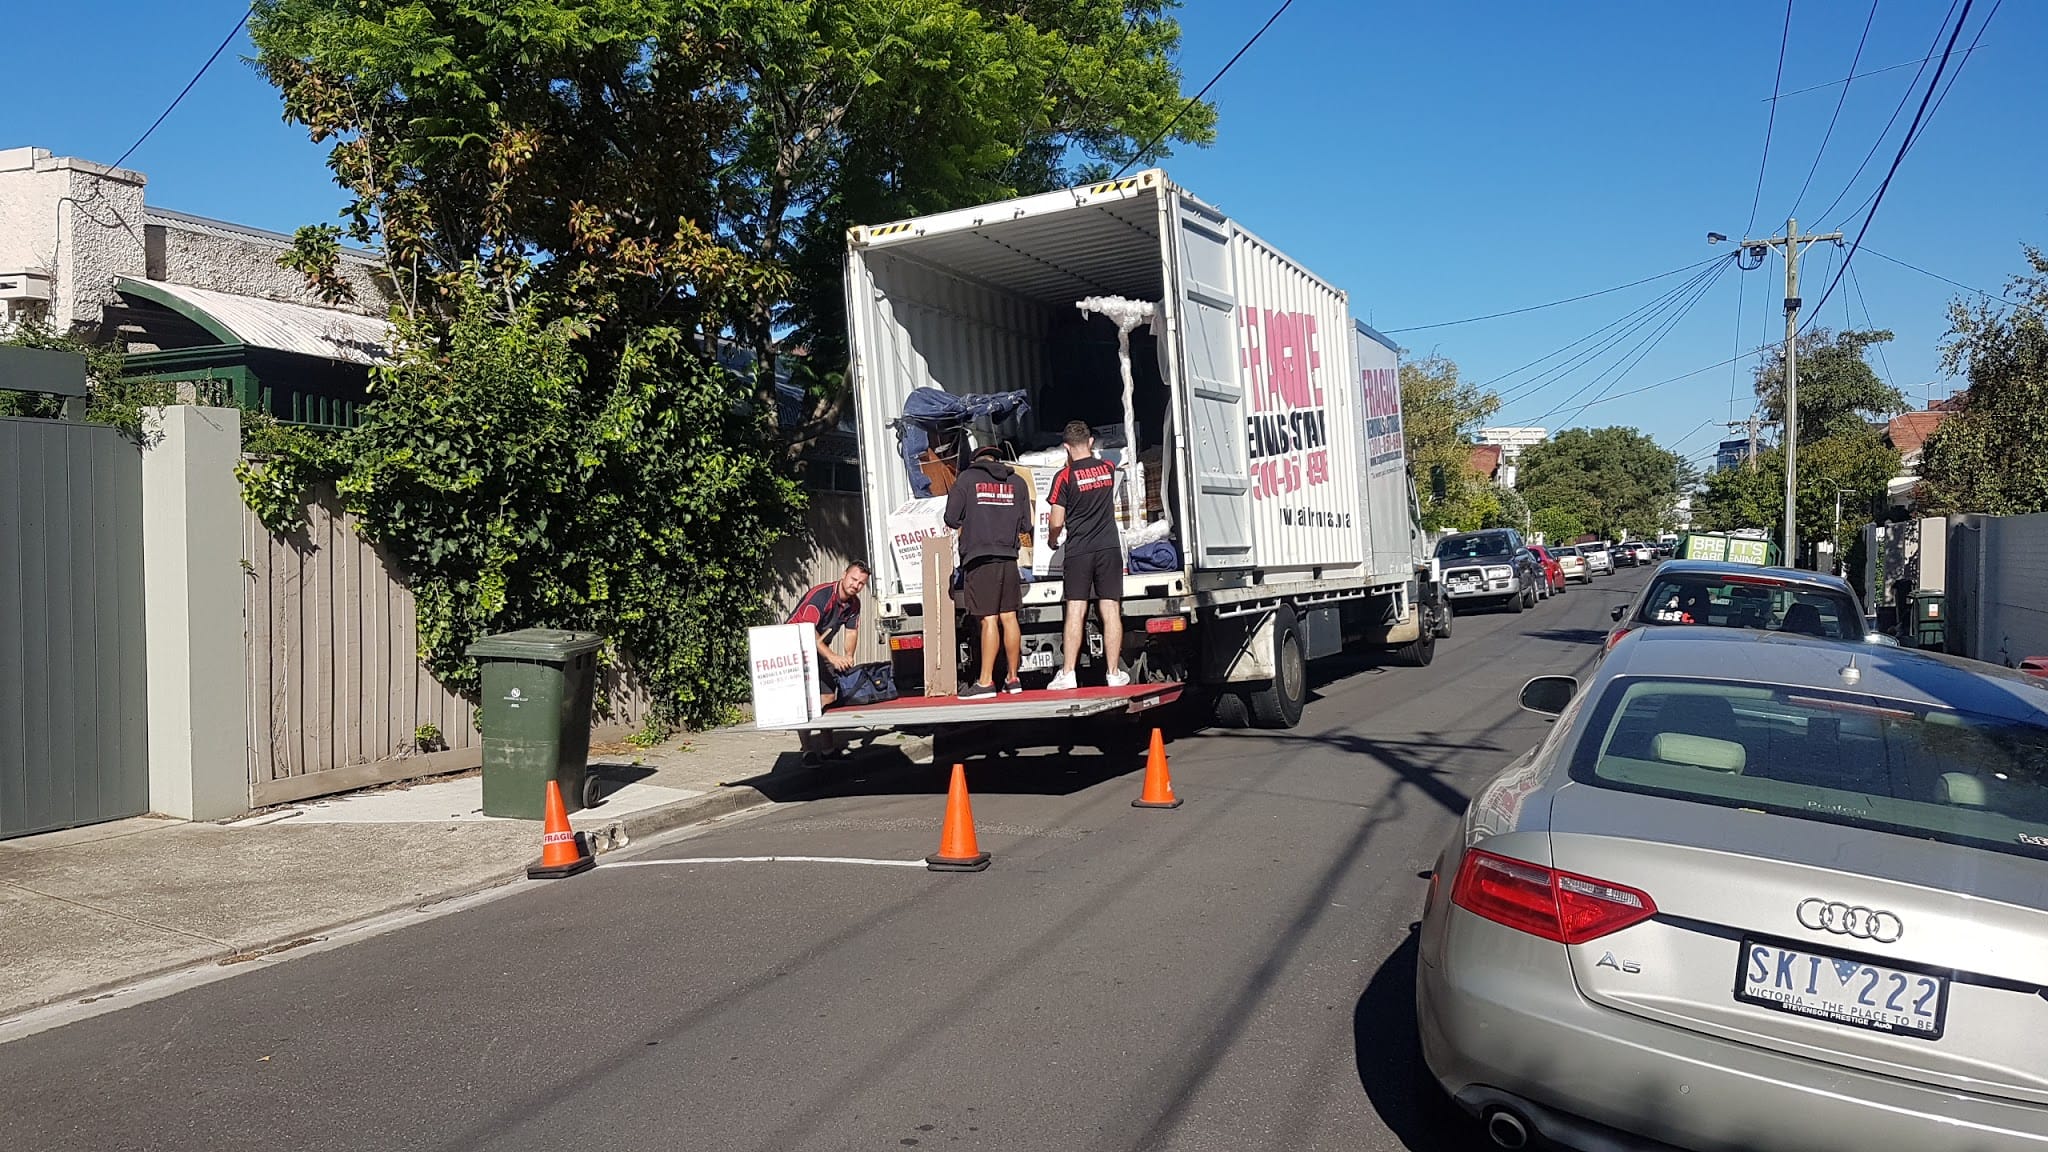 Fragile Removals - Dandenong South, AU, movers near me